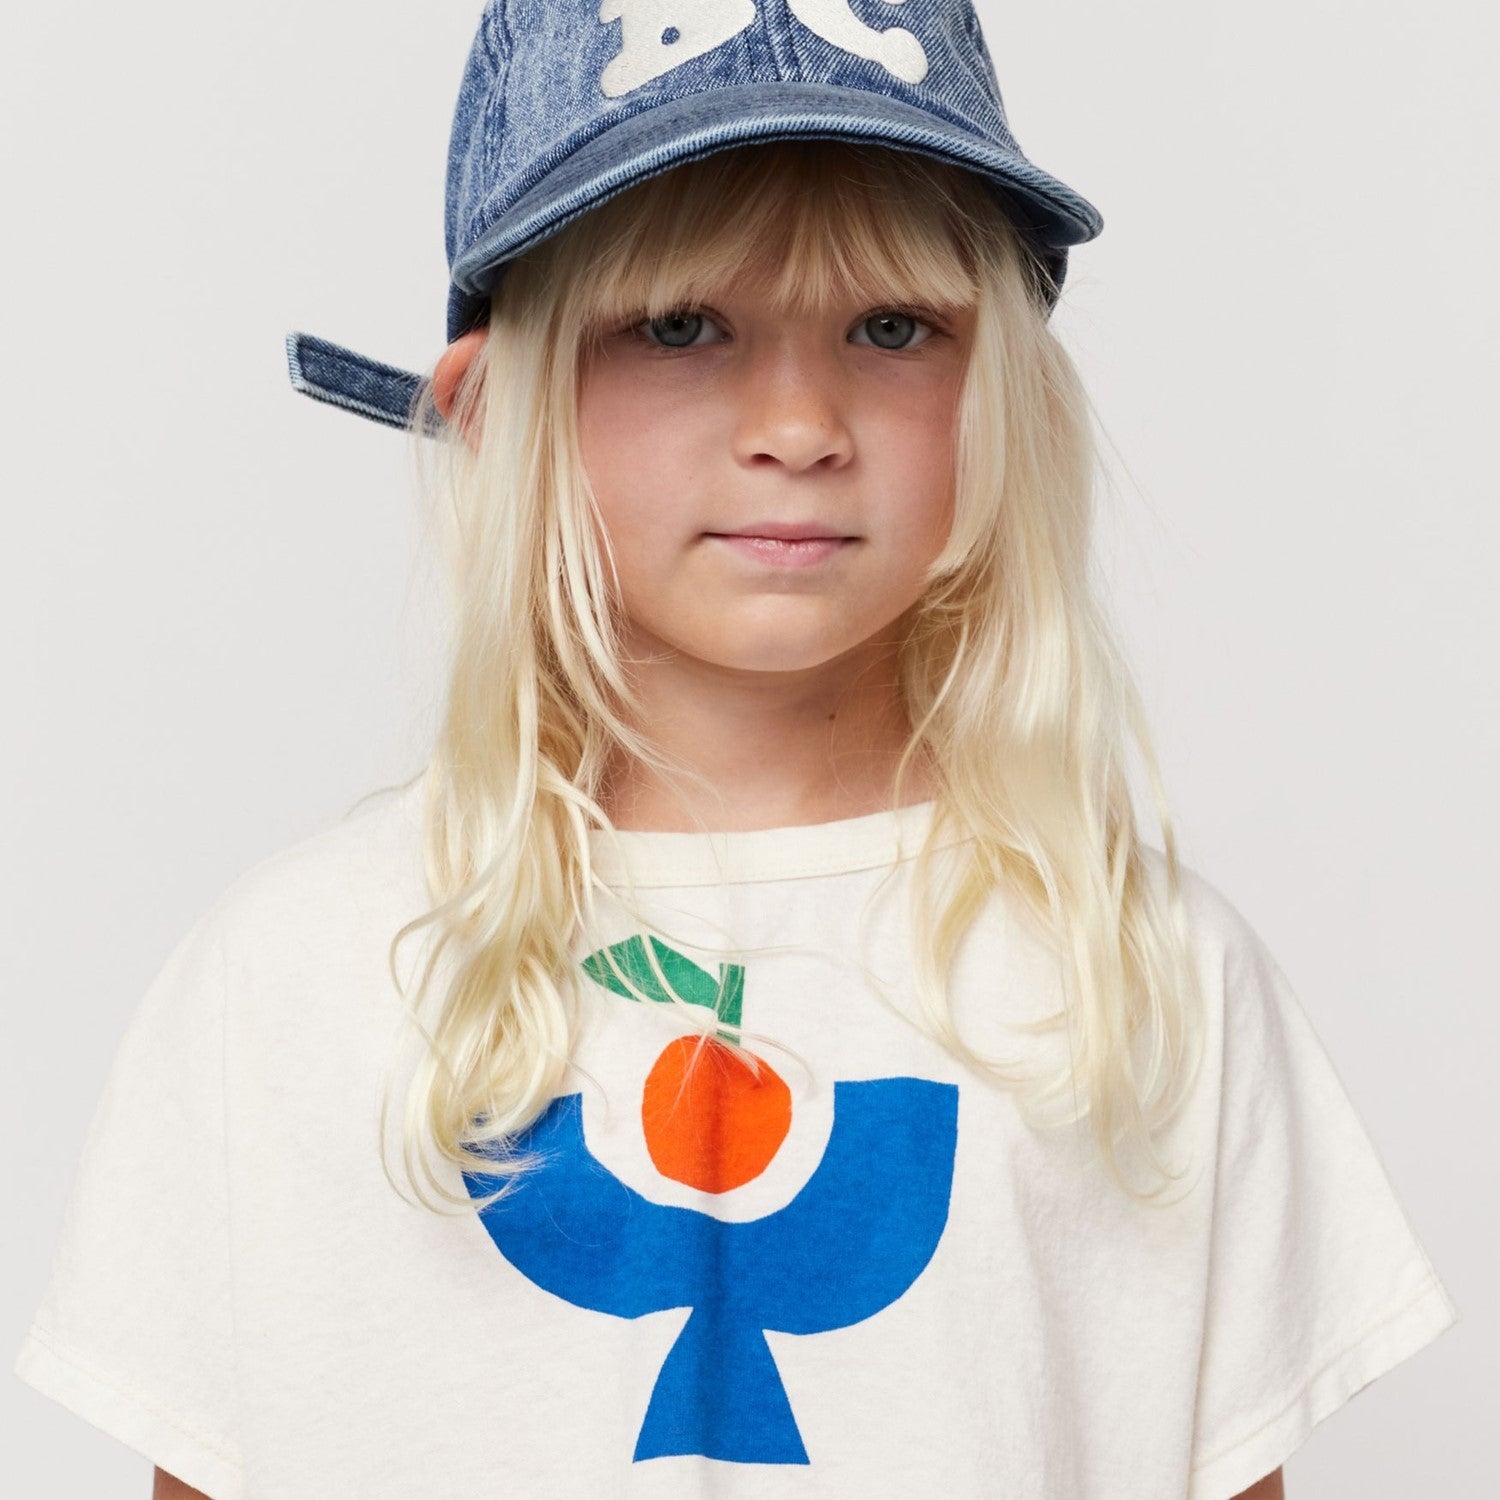 BOBO CHOSES Tomato Plate Cropped T-shirt ALWAYS SHOW